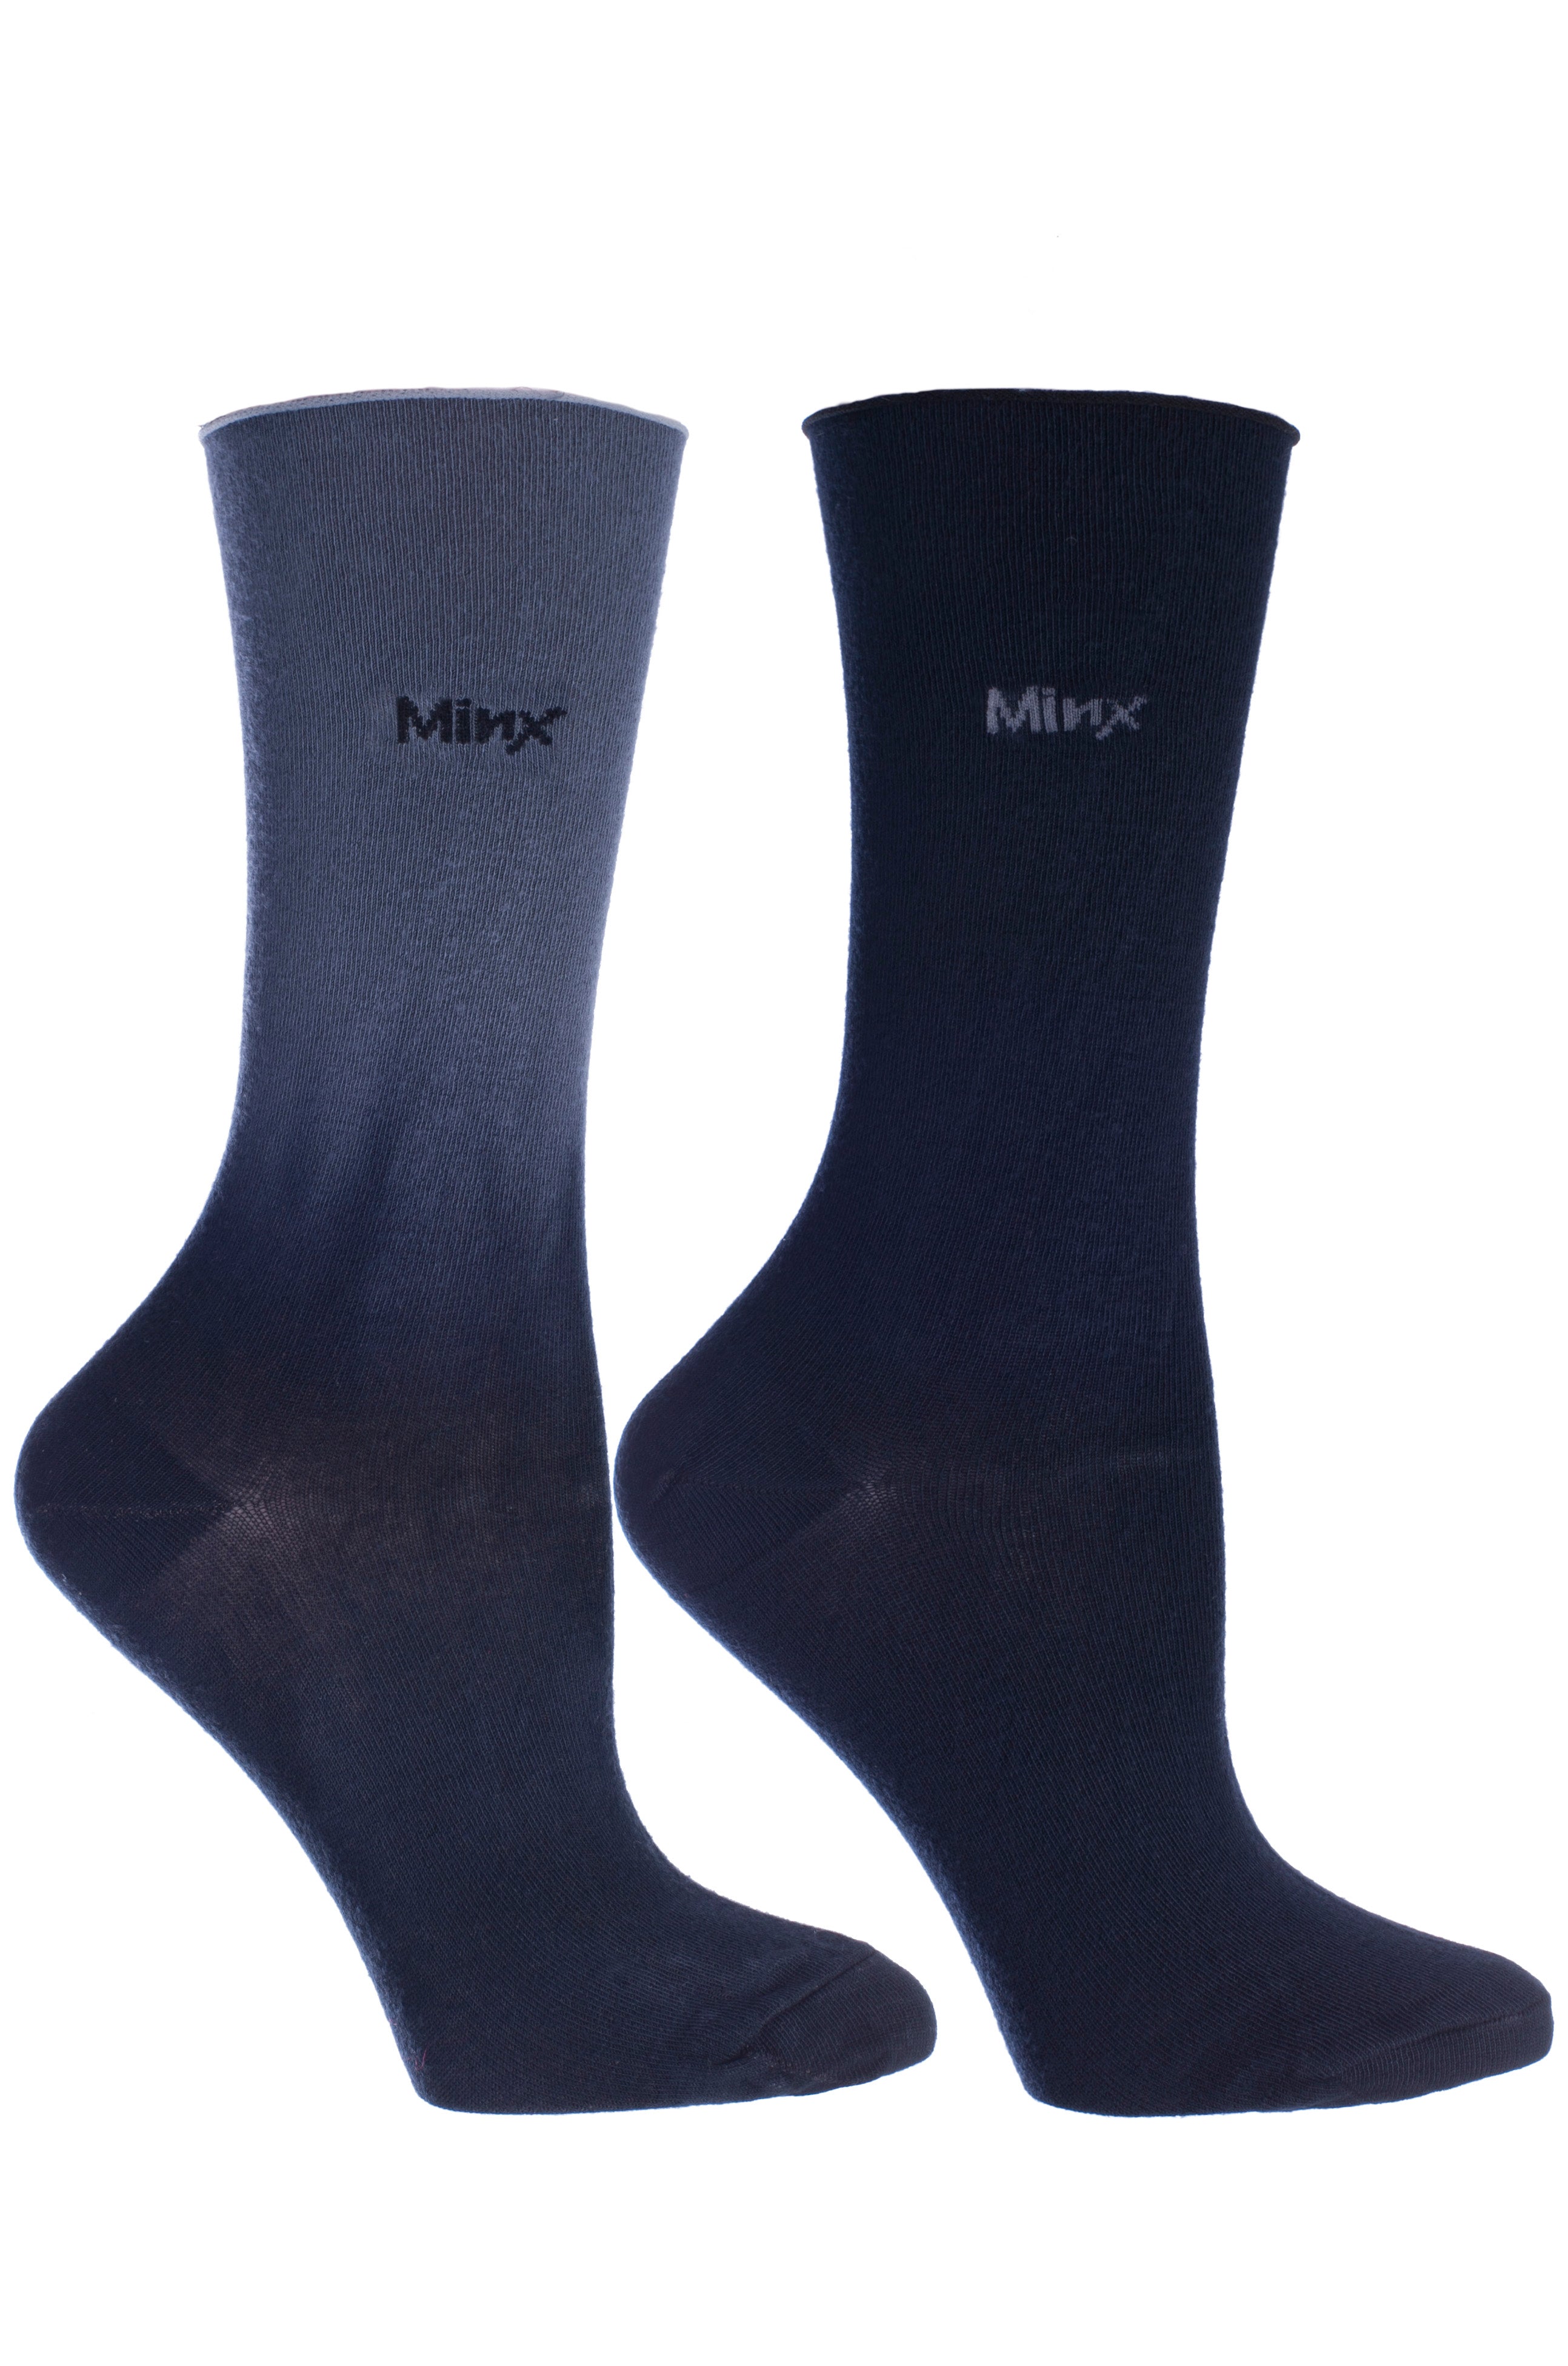 Grey & Ombre Grey 2 Pair Pack Roll Top Crew Socks